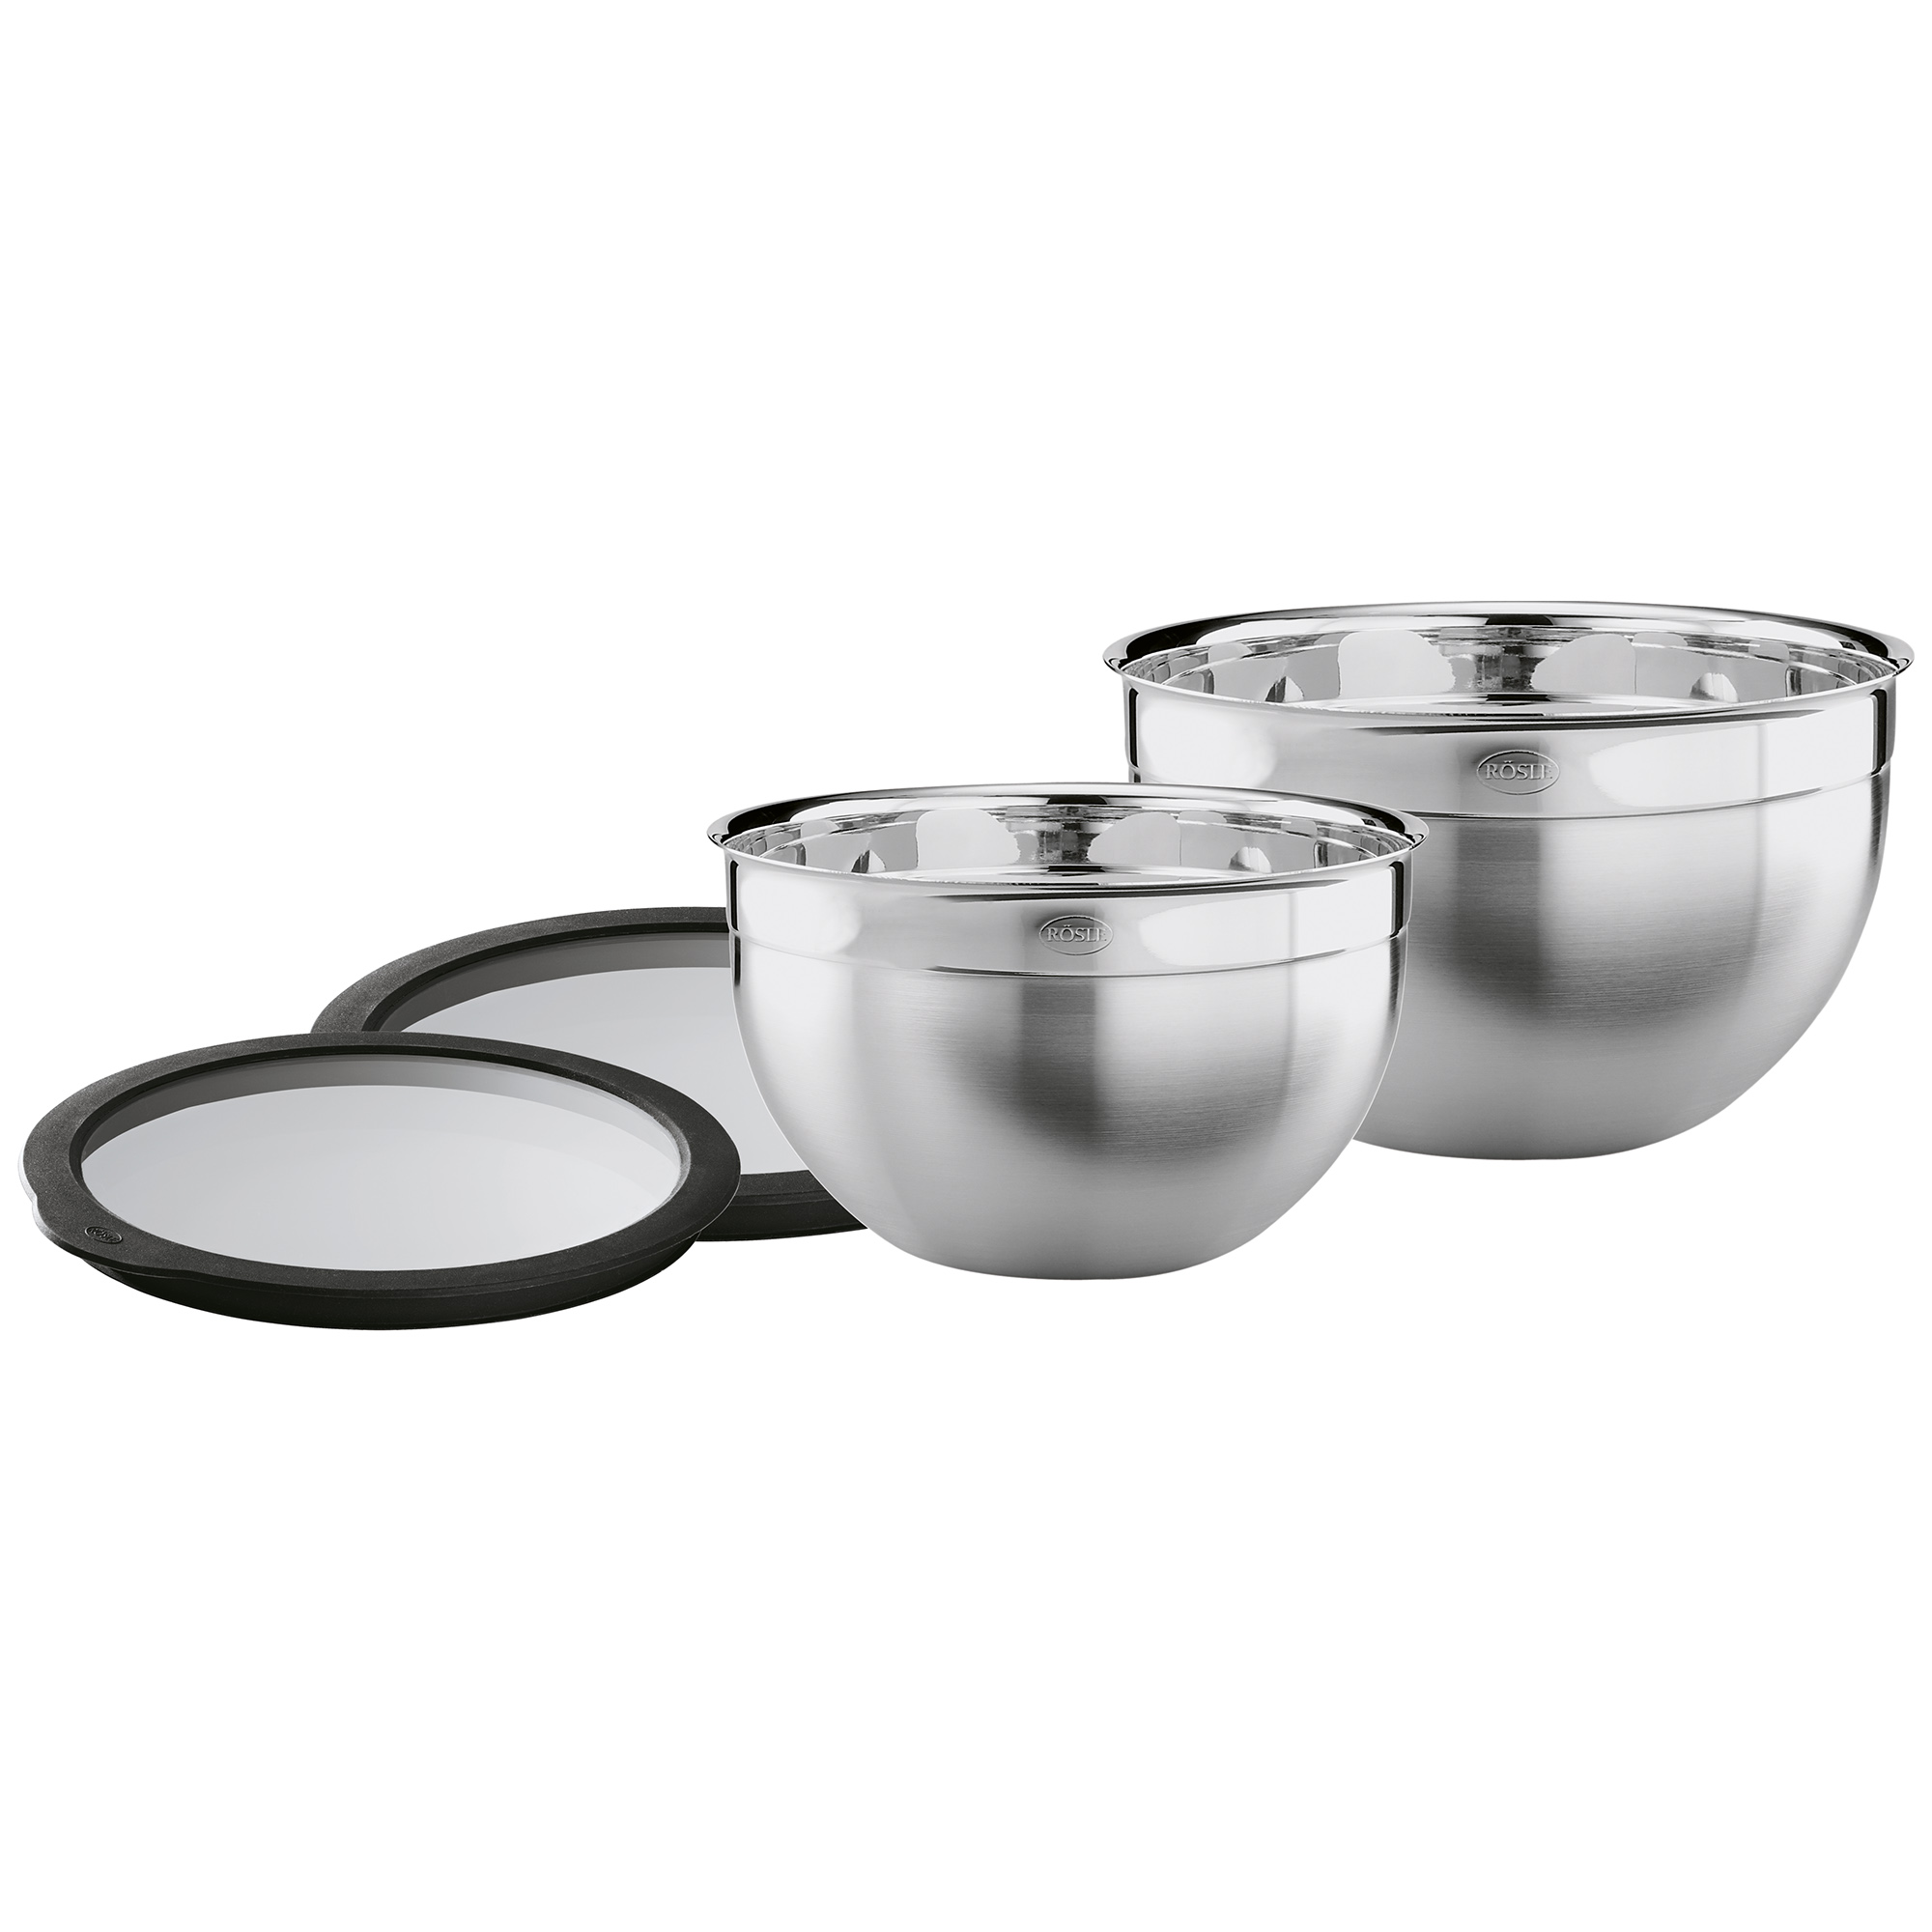 Bowls Set with airtight Lids from glass 2 pieces(Ø 20 cm I 8.0 in. and 24 cm I 9.5 in.)